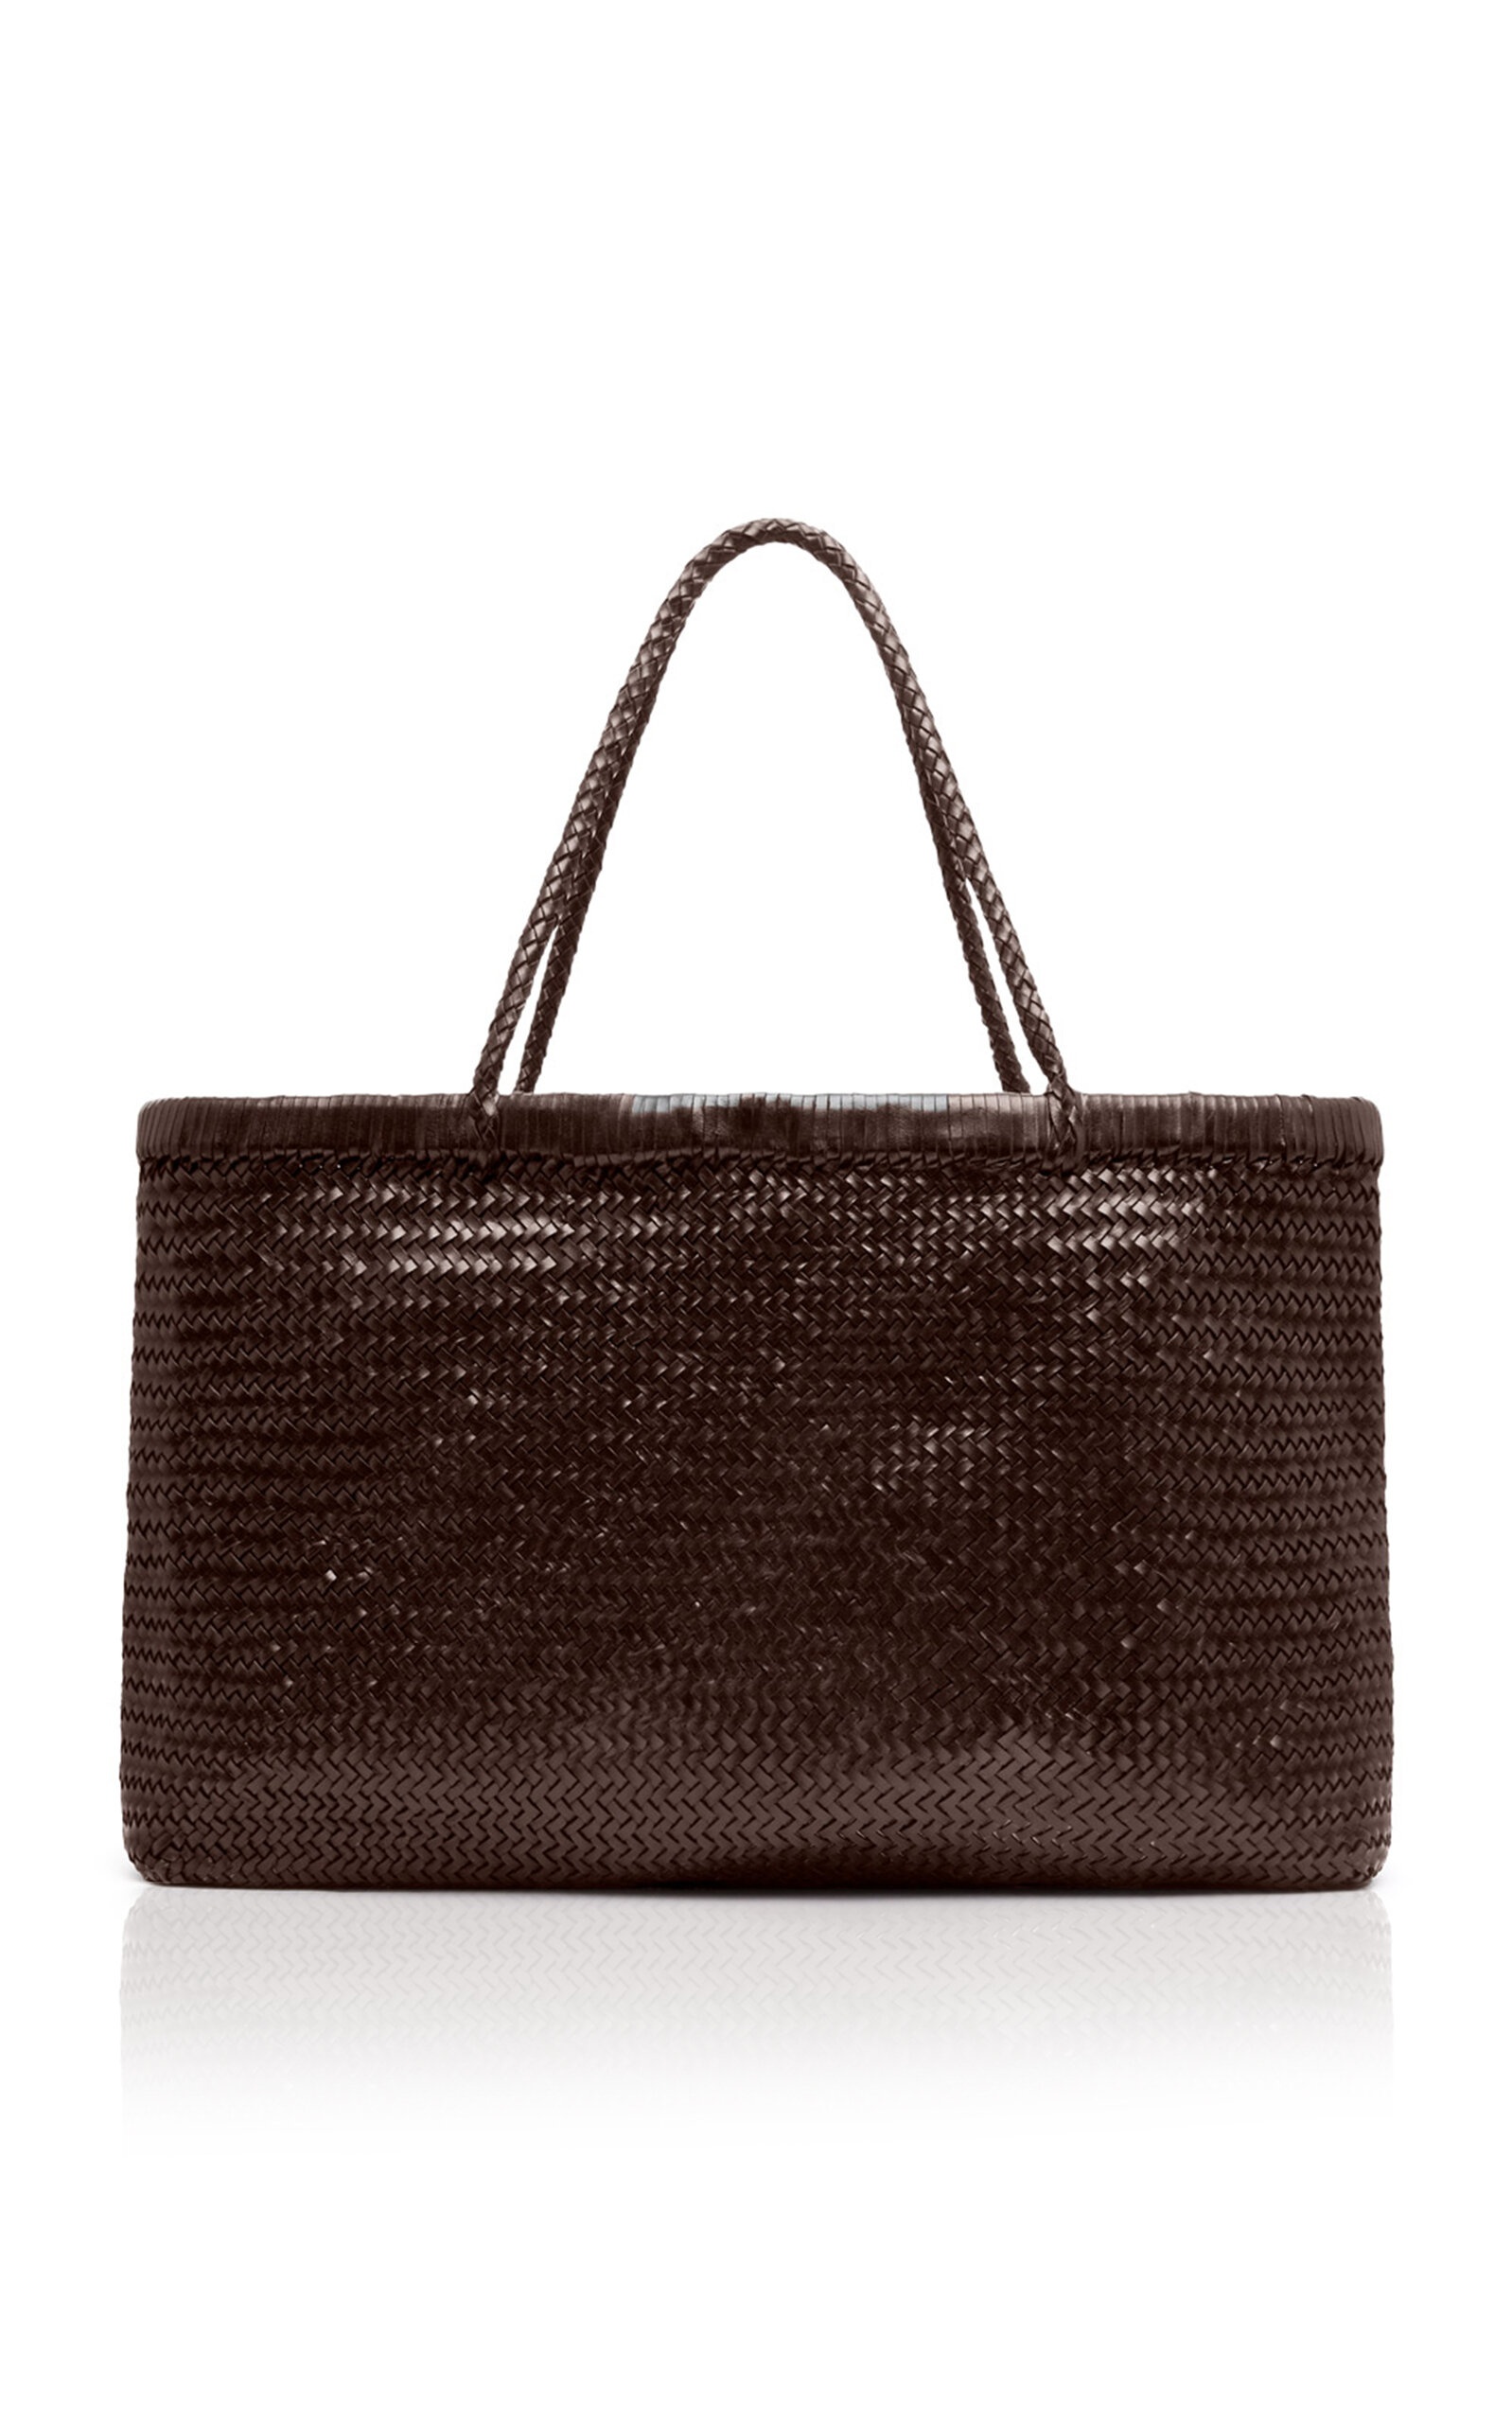 Wide Bagu Woven Leather Tote Bag brown - 1